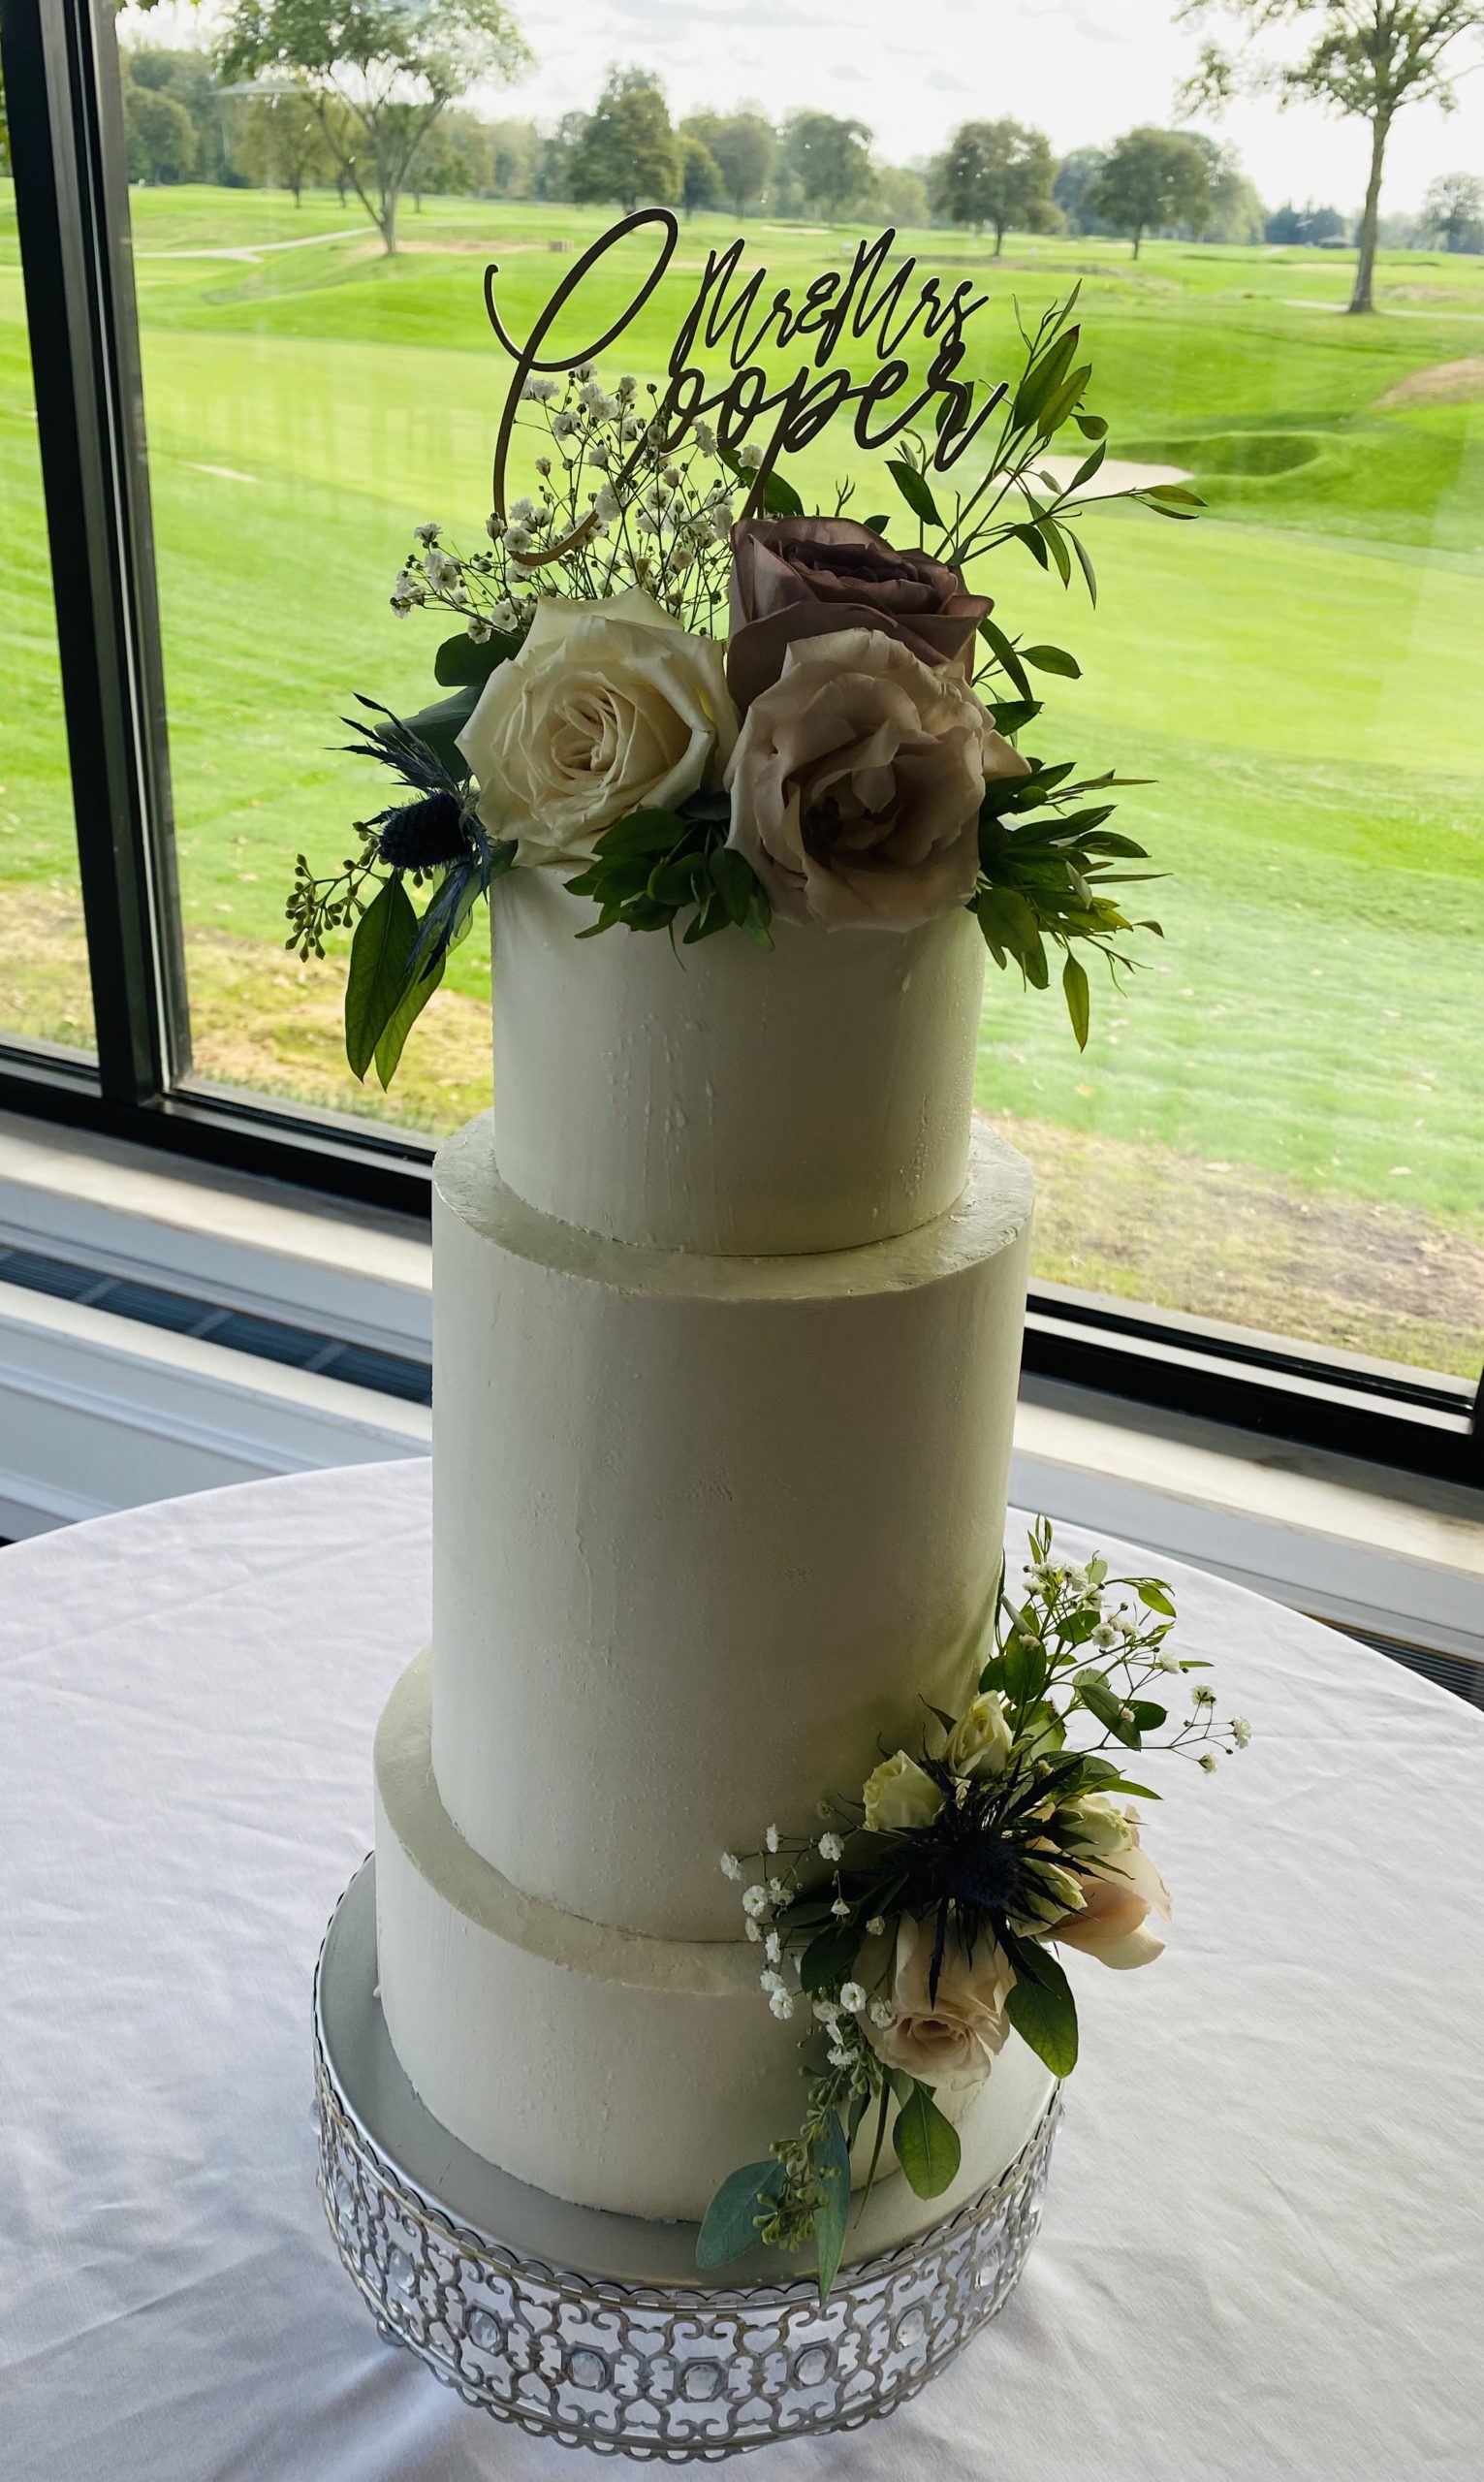 A beautiful 3-tier custom wedding cake with live flowers from Village Patisserie in Toledo, Ohio